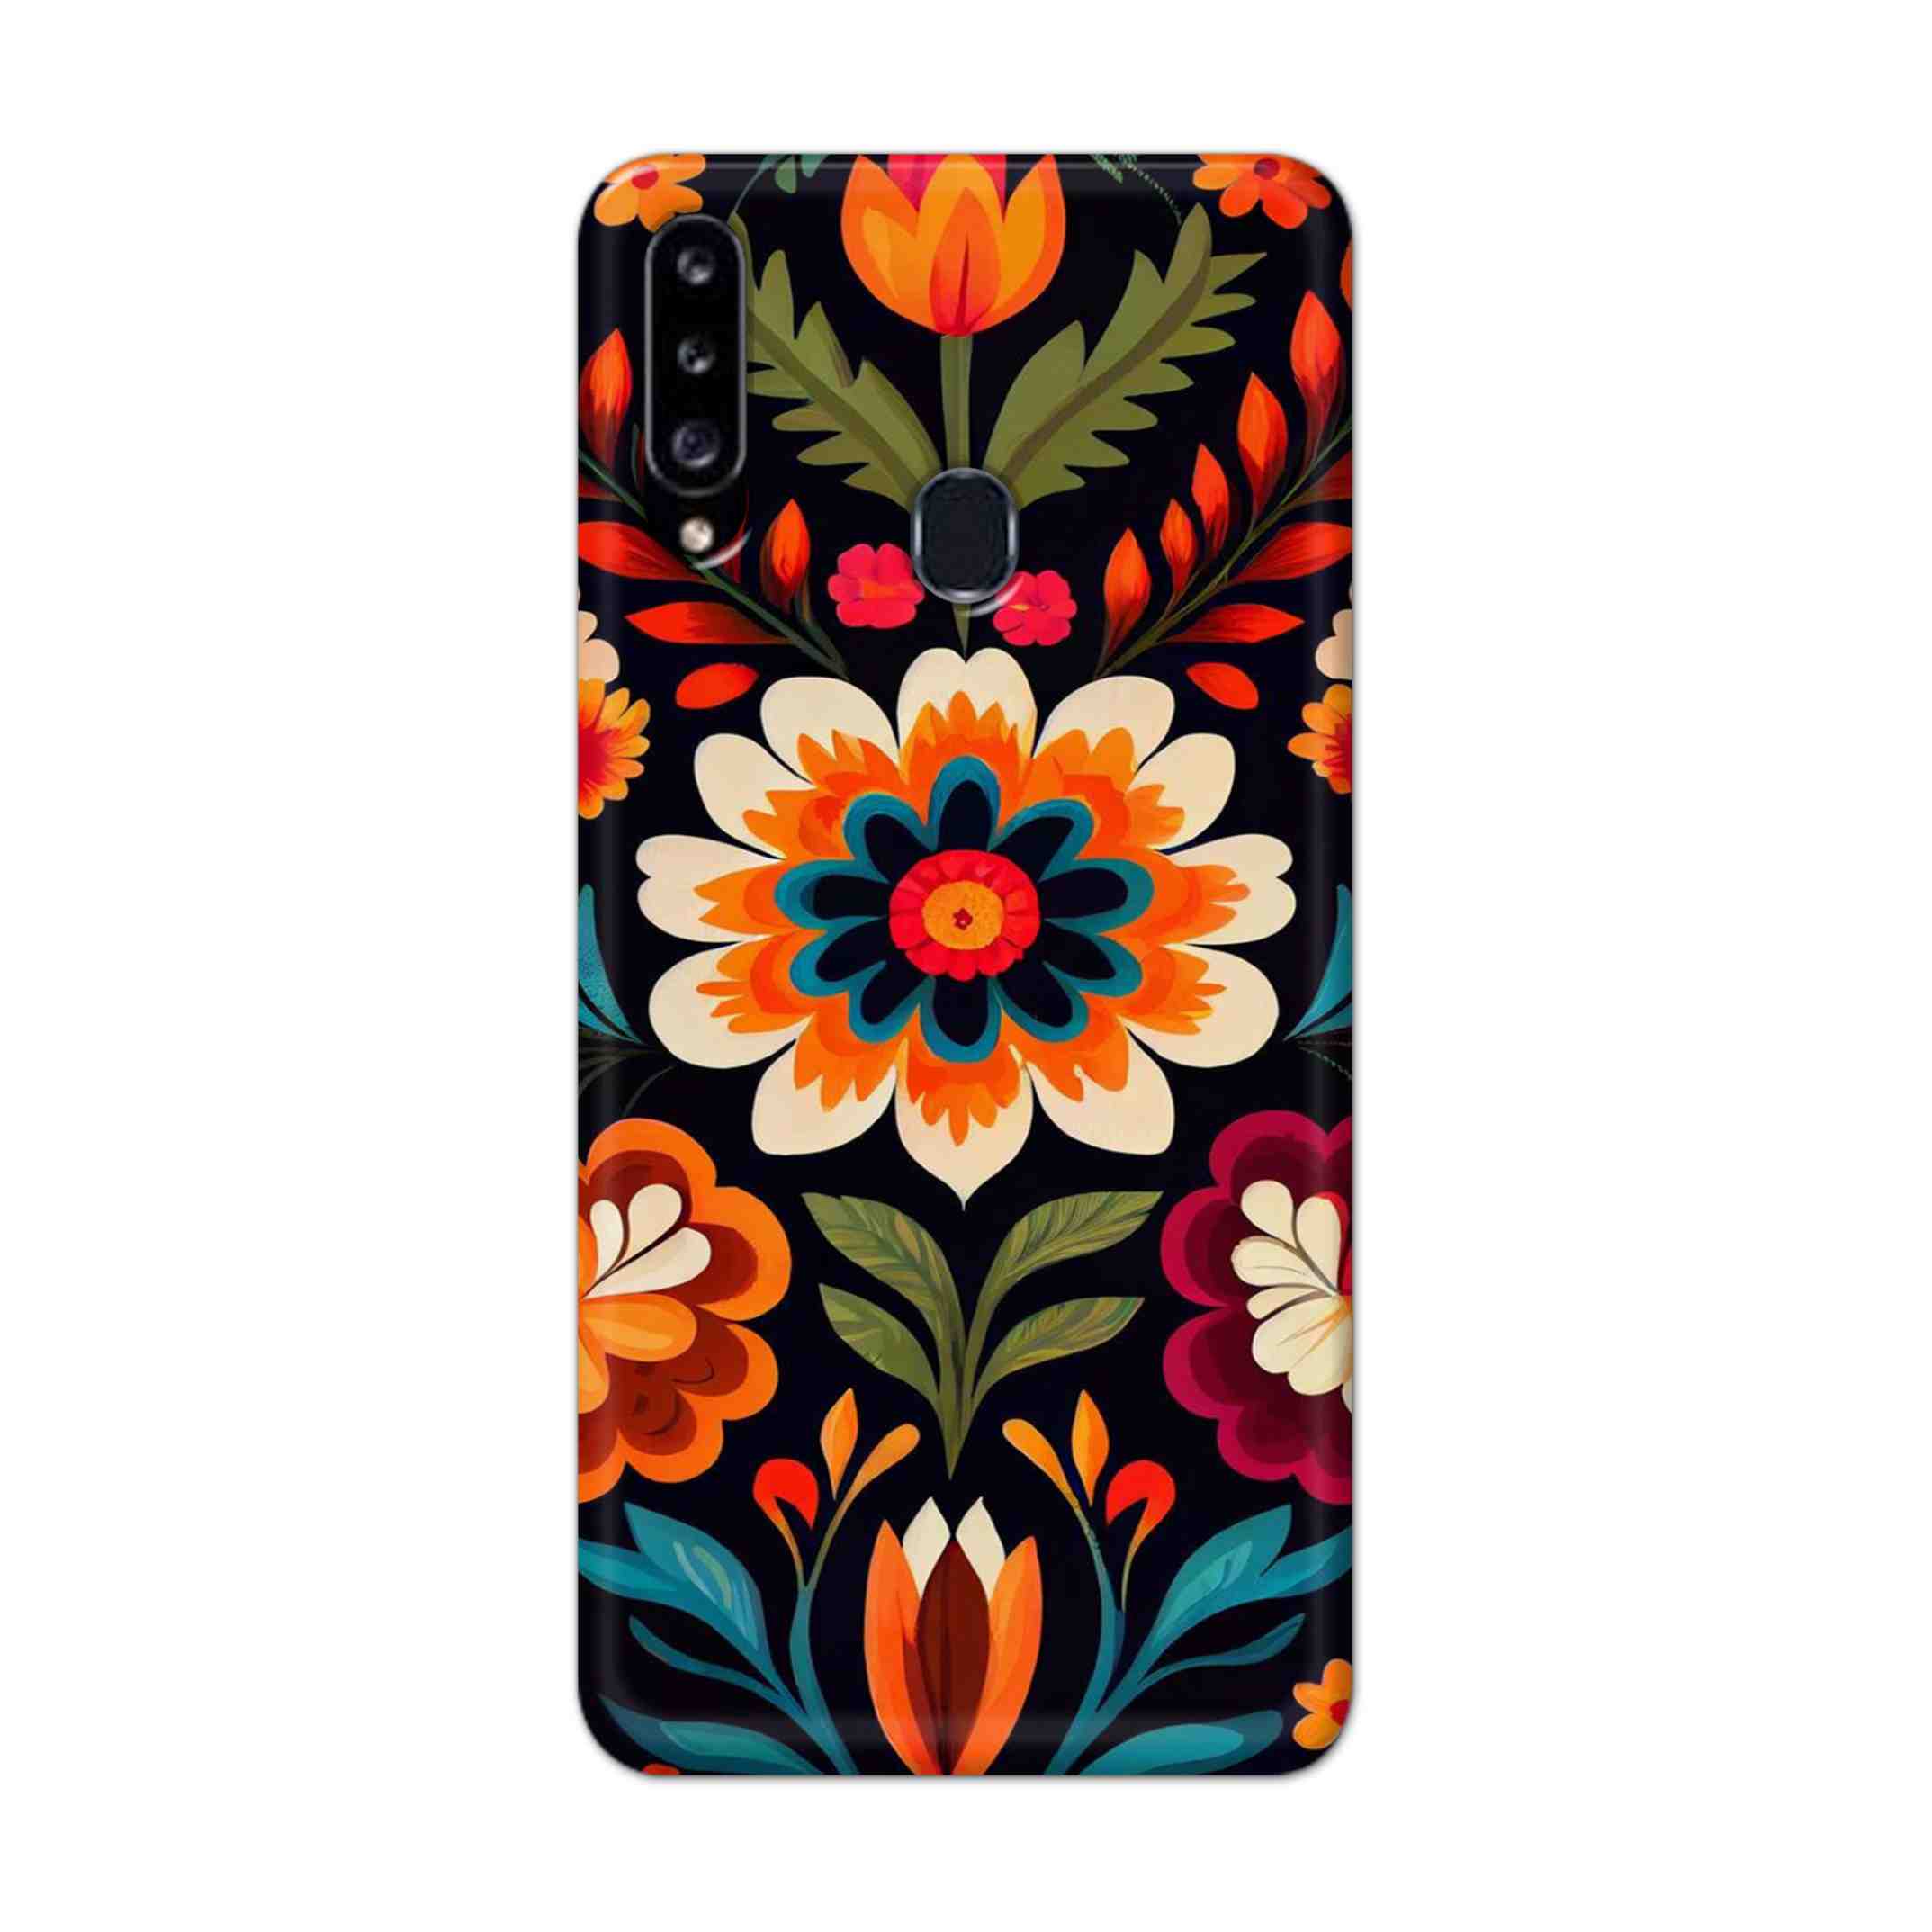 Buy Flower Hard Back Mobile Phone Case Cover For Samsung Galaxy A21 Online